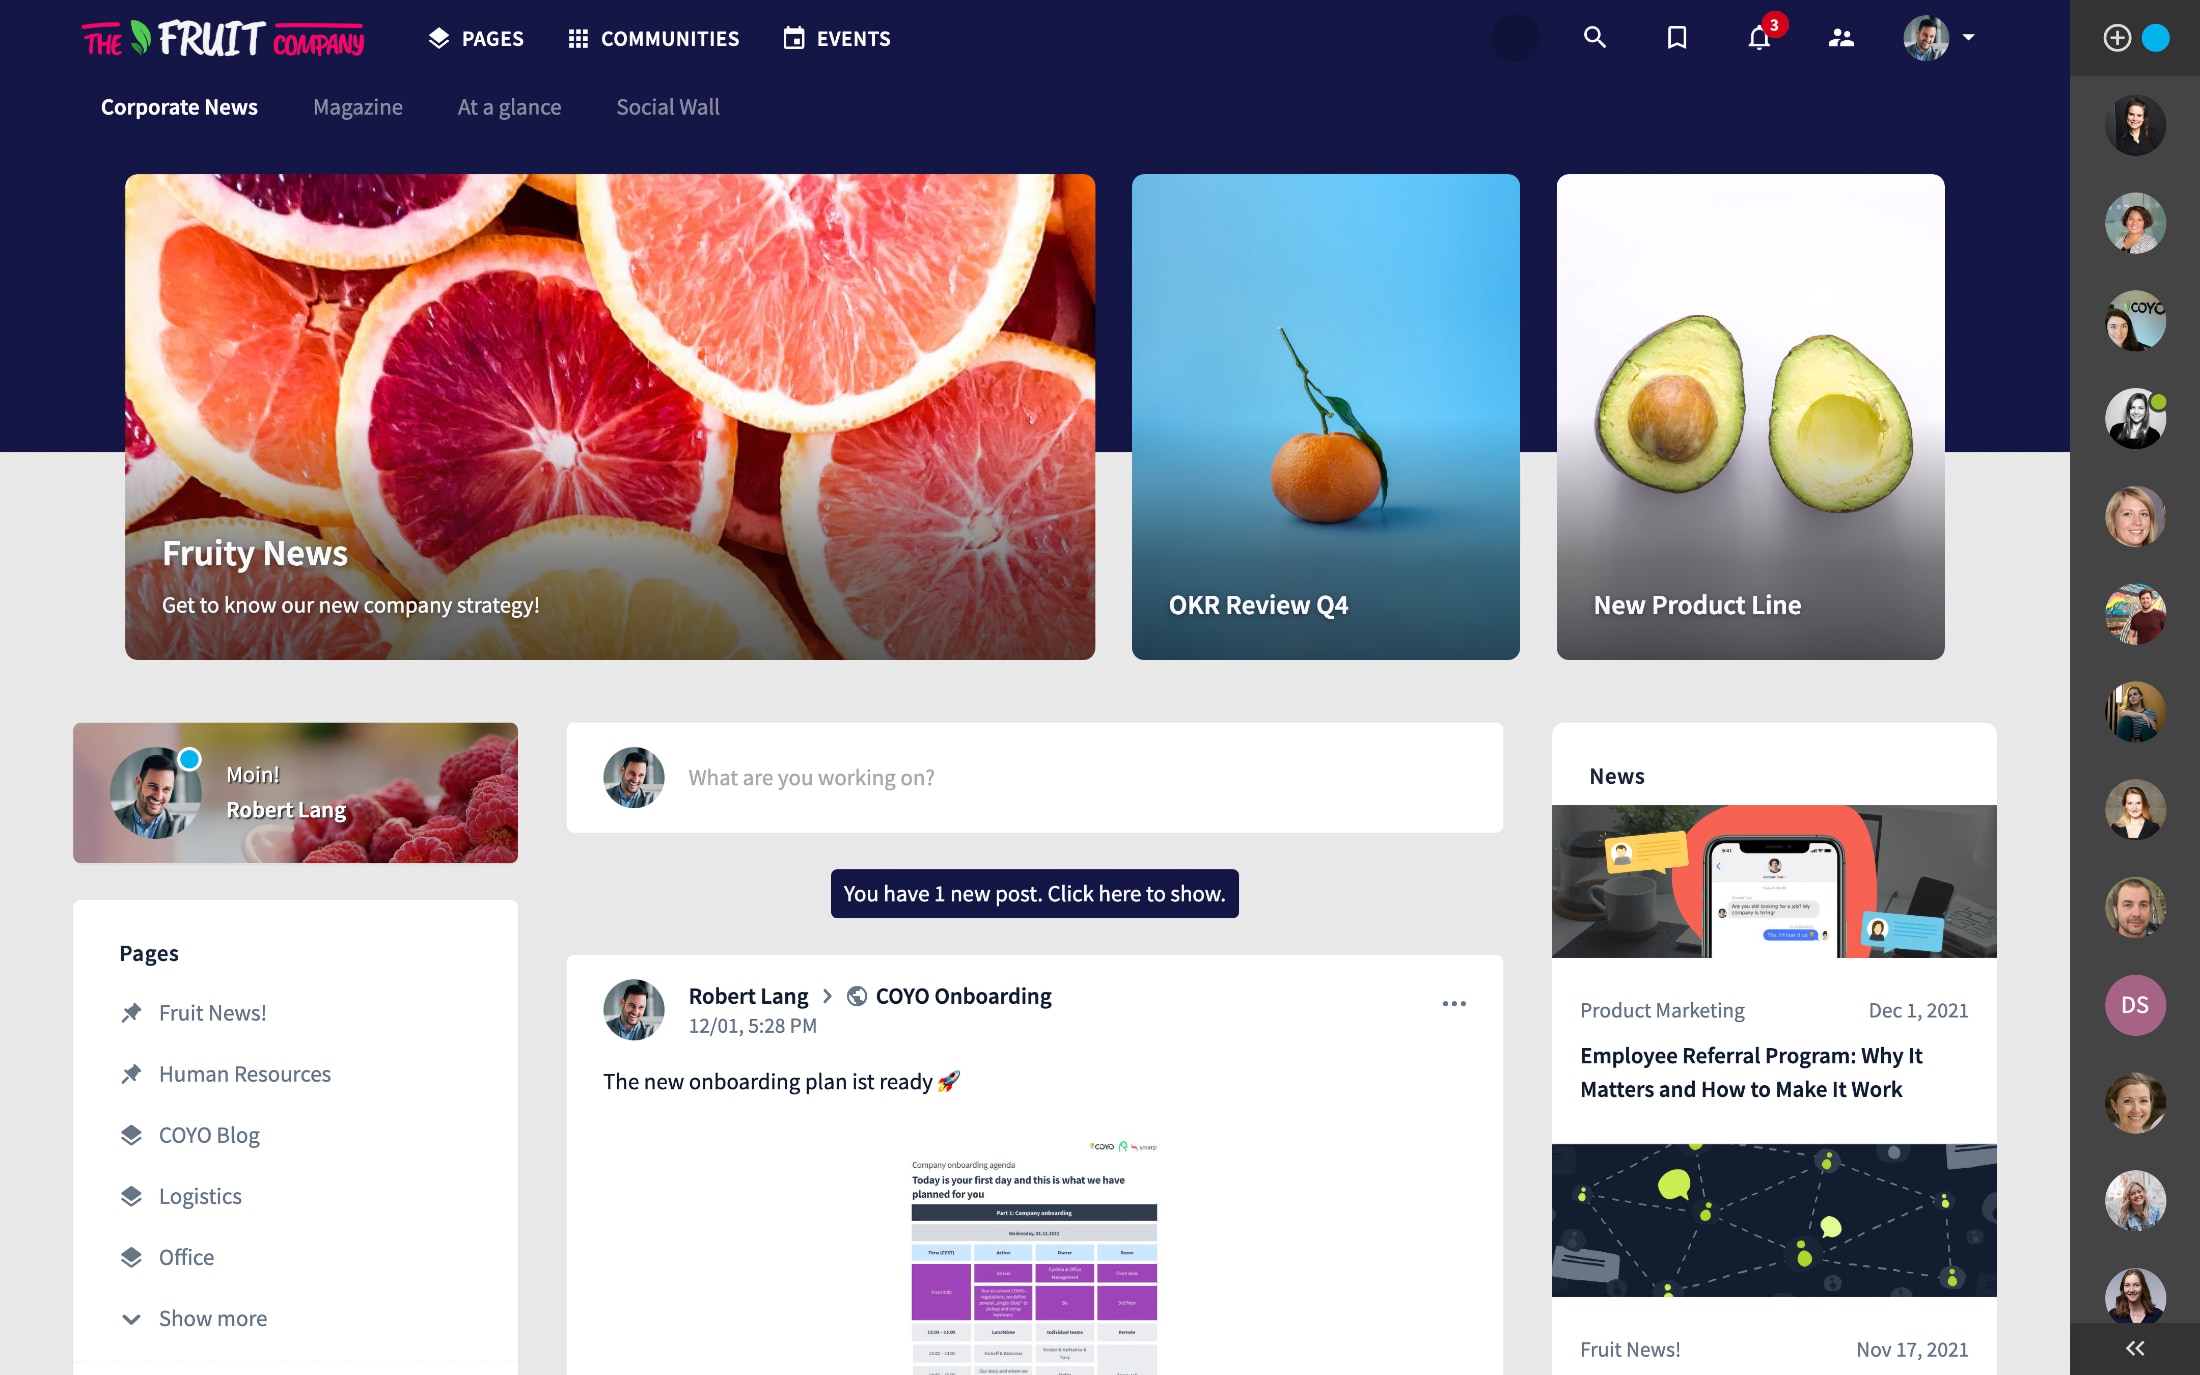 Coyo mock intranet home page. Fruit themed, three columns, lots of fruit photos with headlines over them.